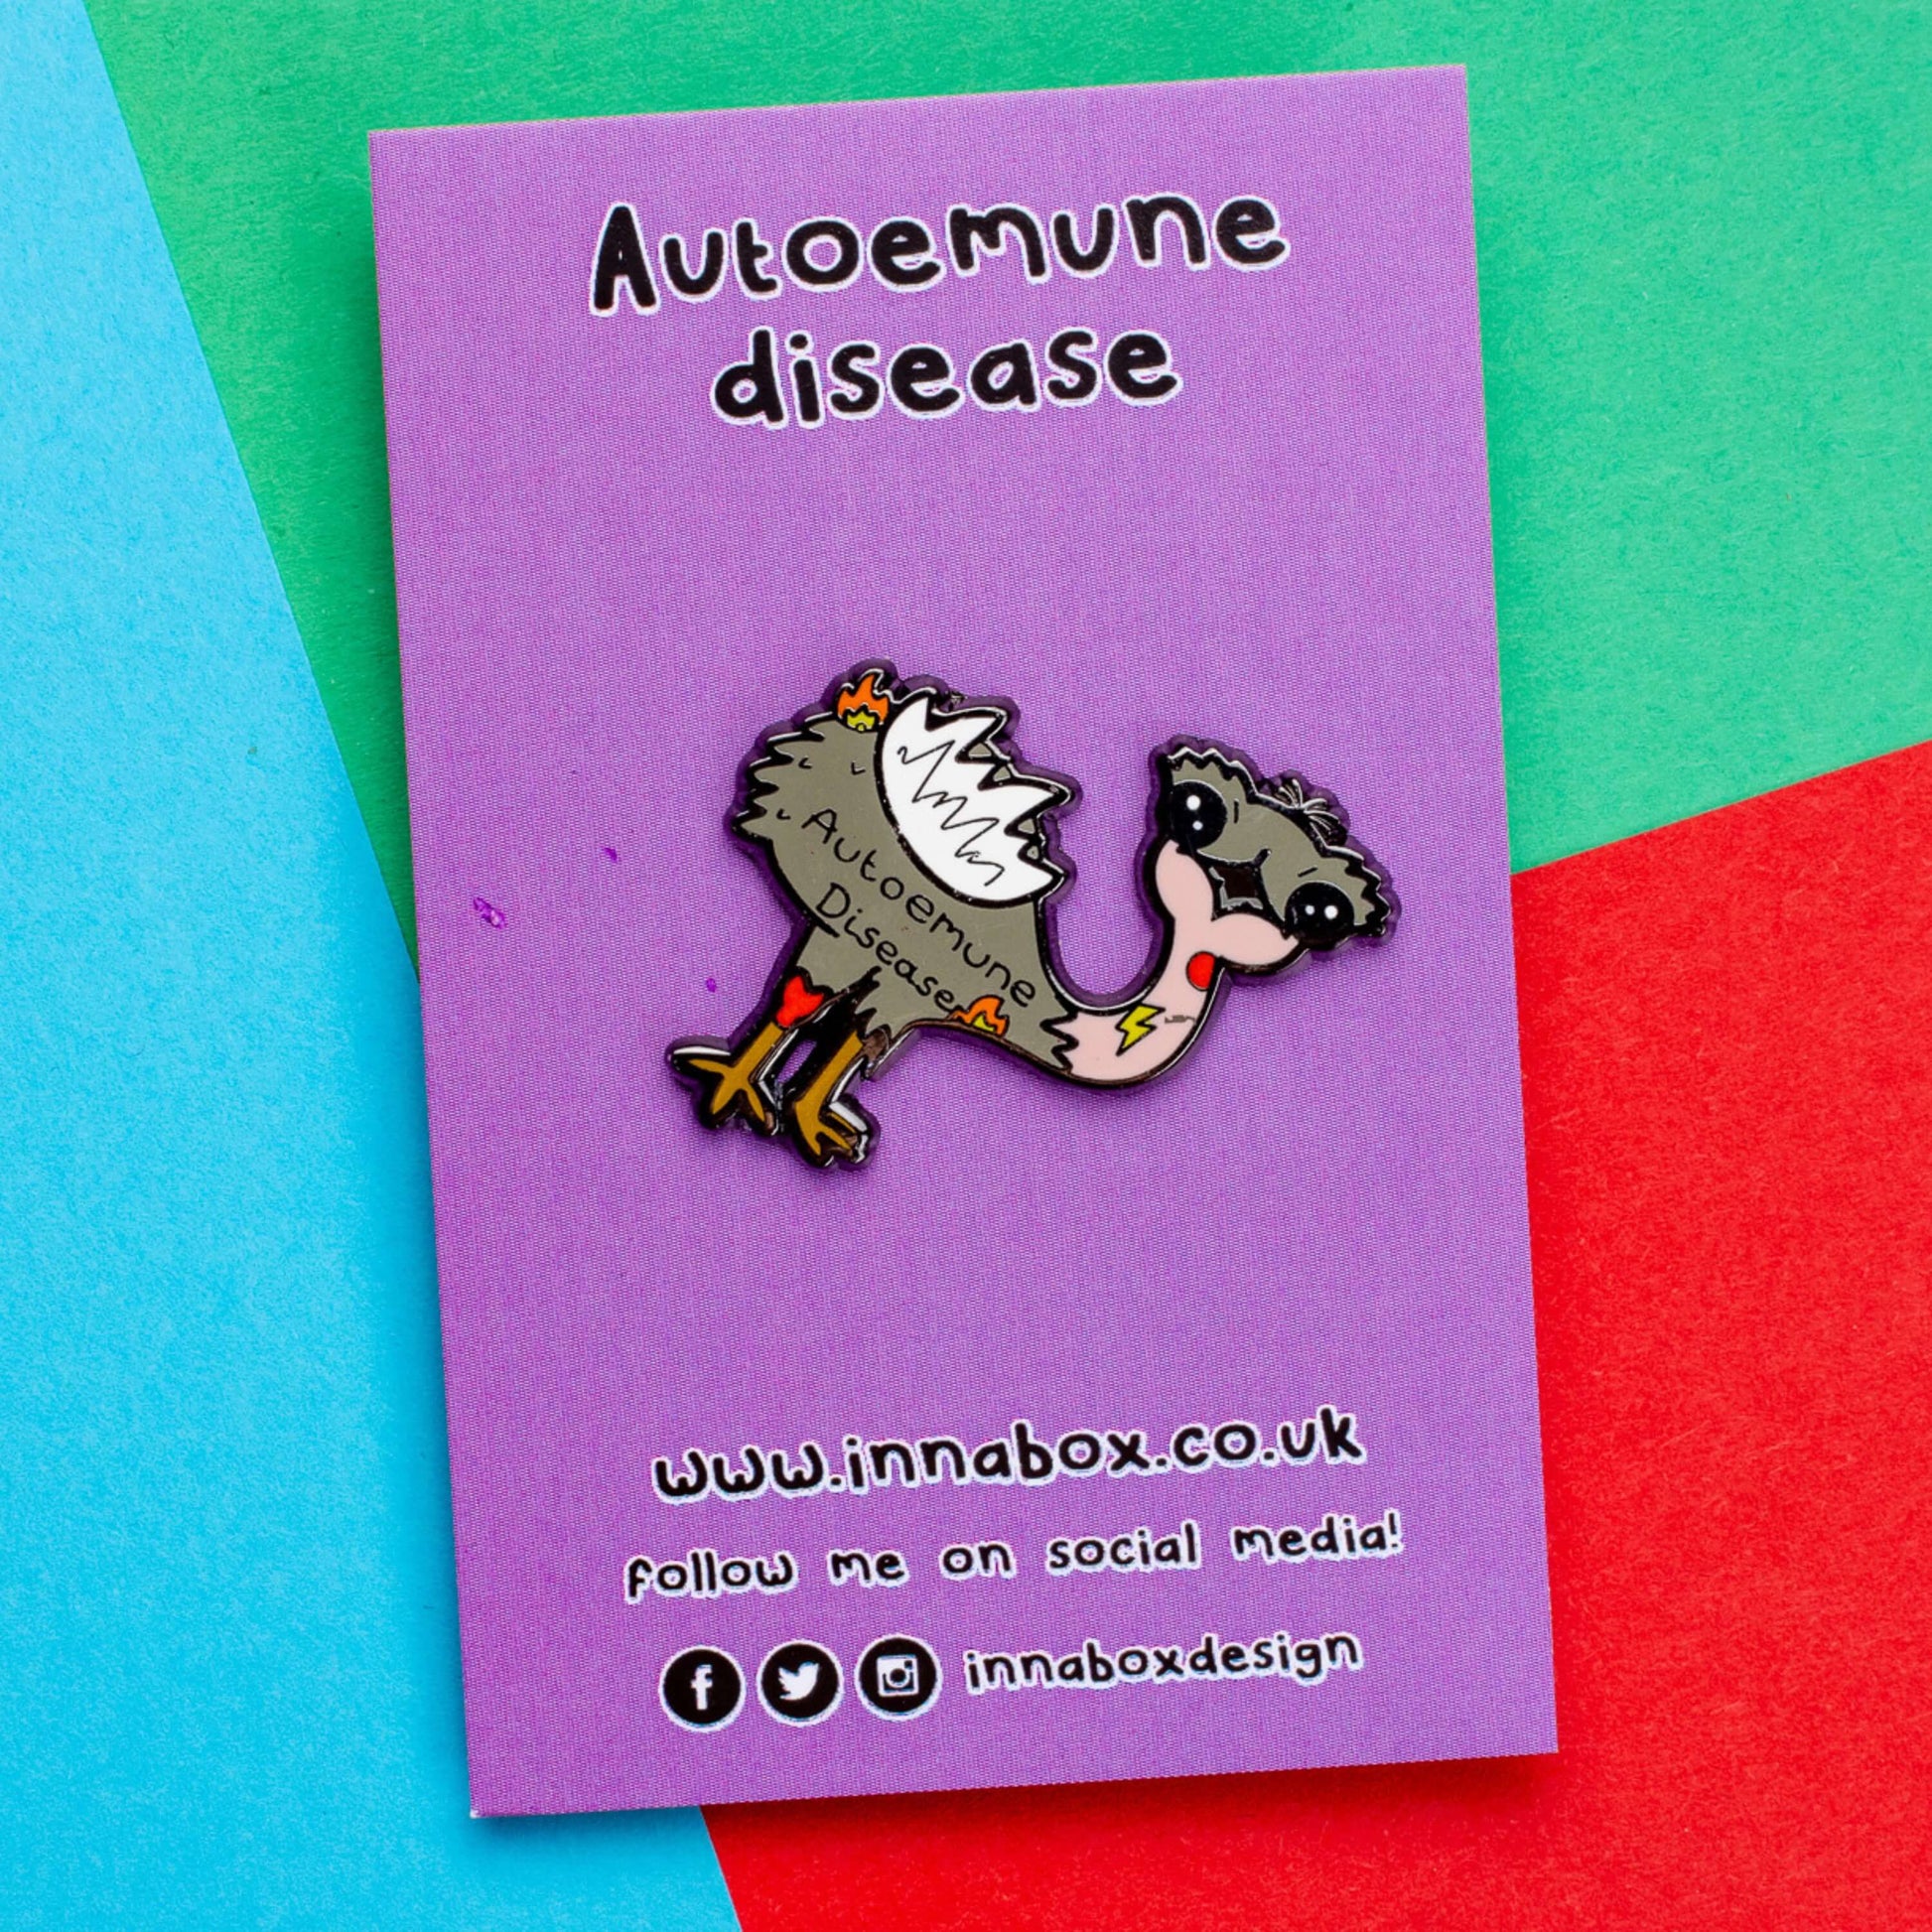 Autoemune Enamel Pin - Autoimmune Disease on a purple backing card laid on a red, blue and green background. The pin is a grey and white emu bird with various problems highlighted with lightning bolts, flames and red circles with the words autoemune disease written across its belly. Design created to raise awareness for autoimmune diseases.